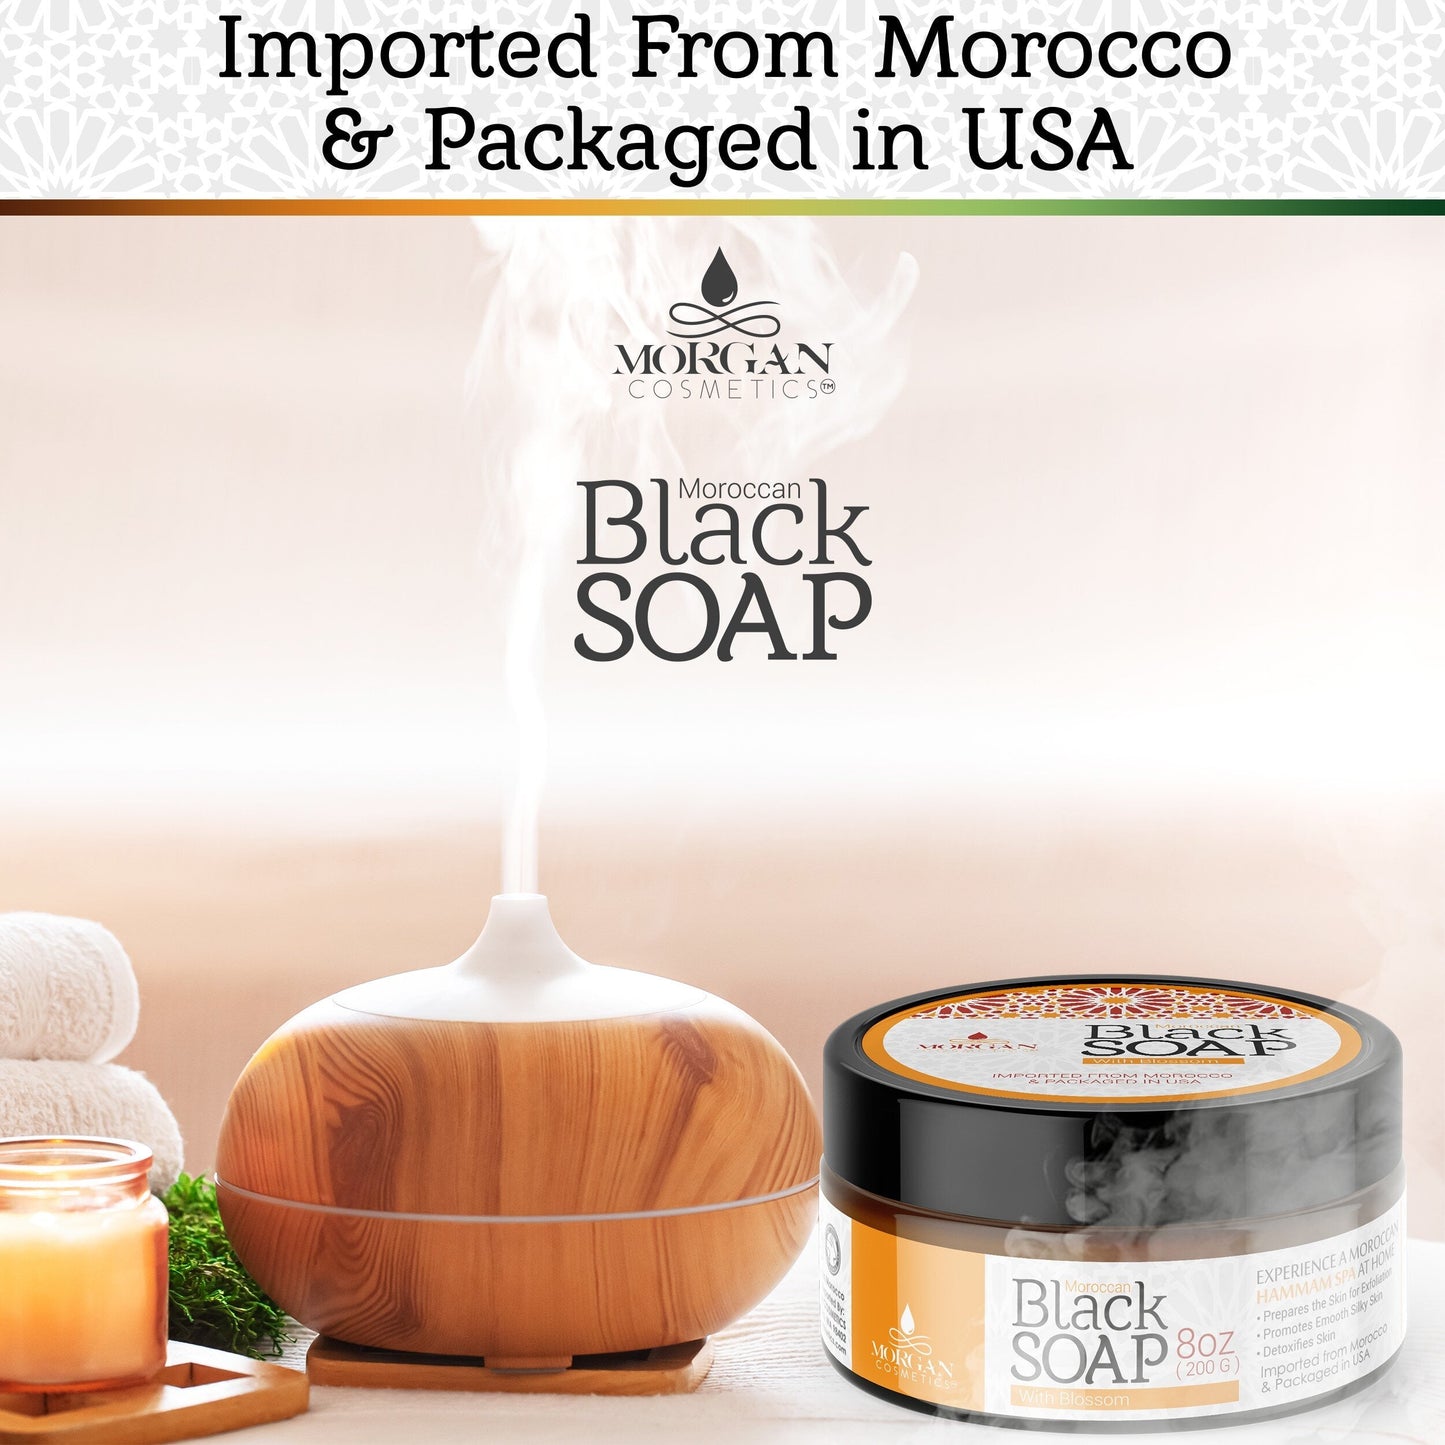 Moroccan Black Soap with Blossom 8oz freeshipping - morgancosmeticsofficial